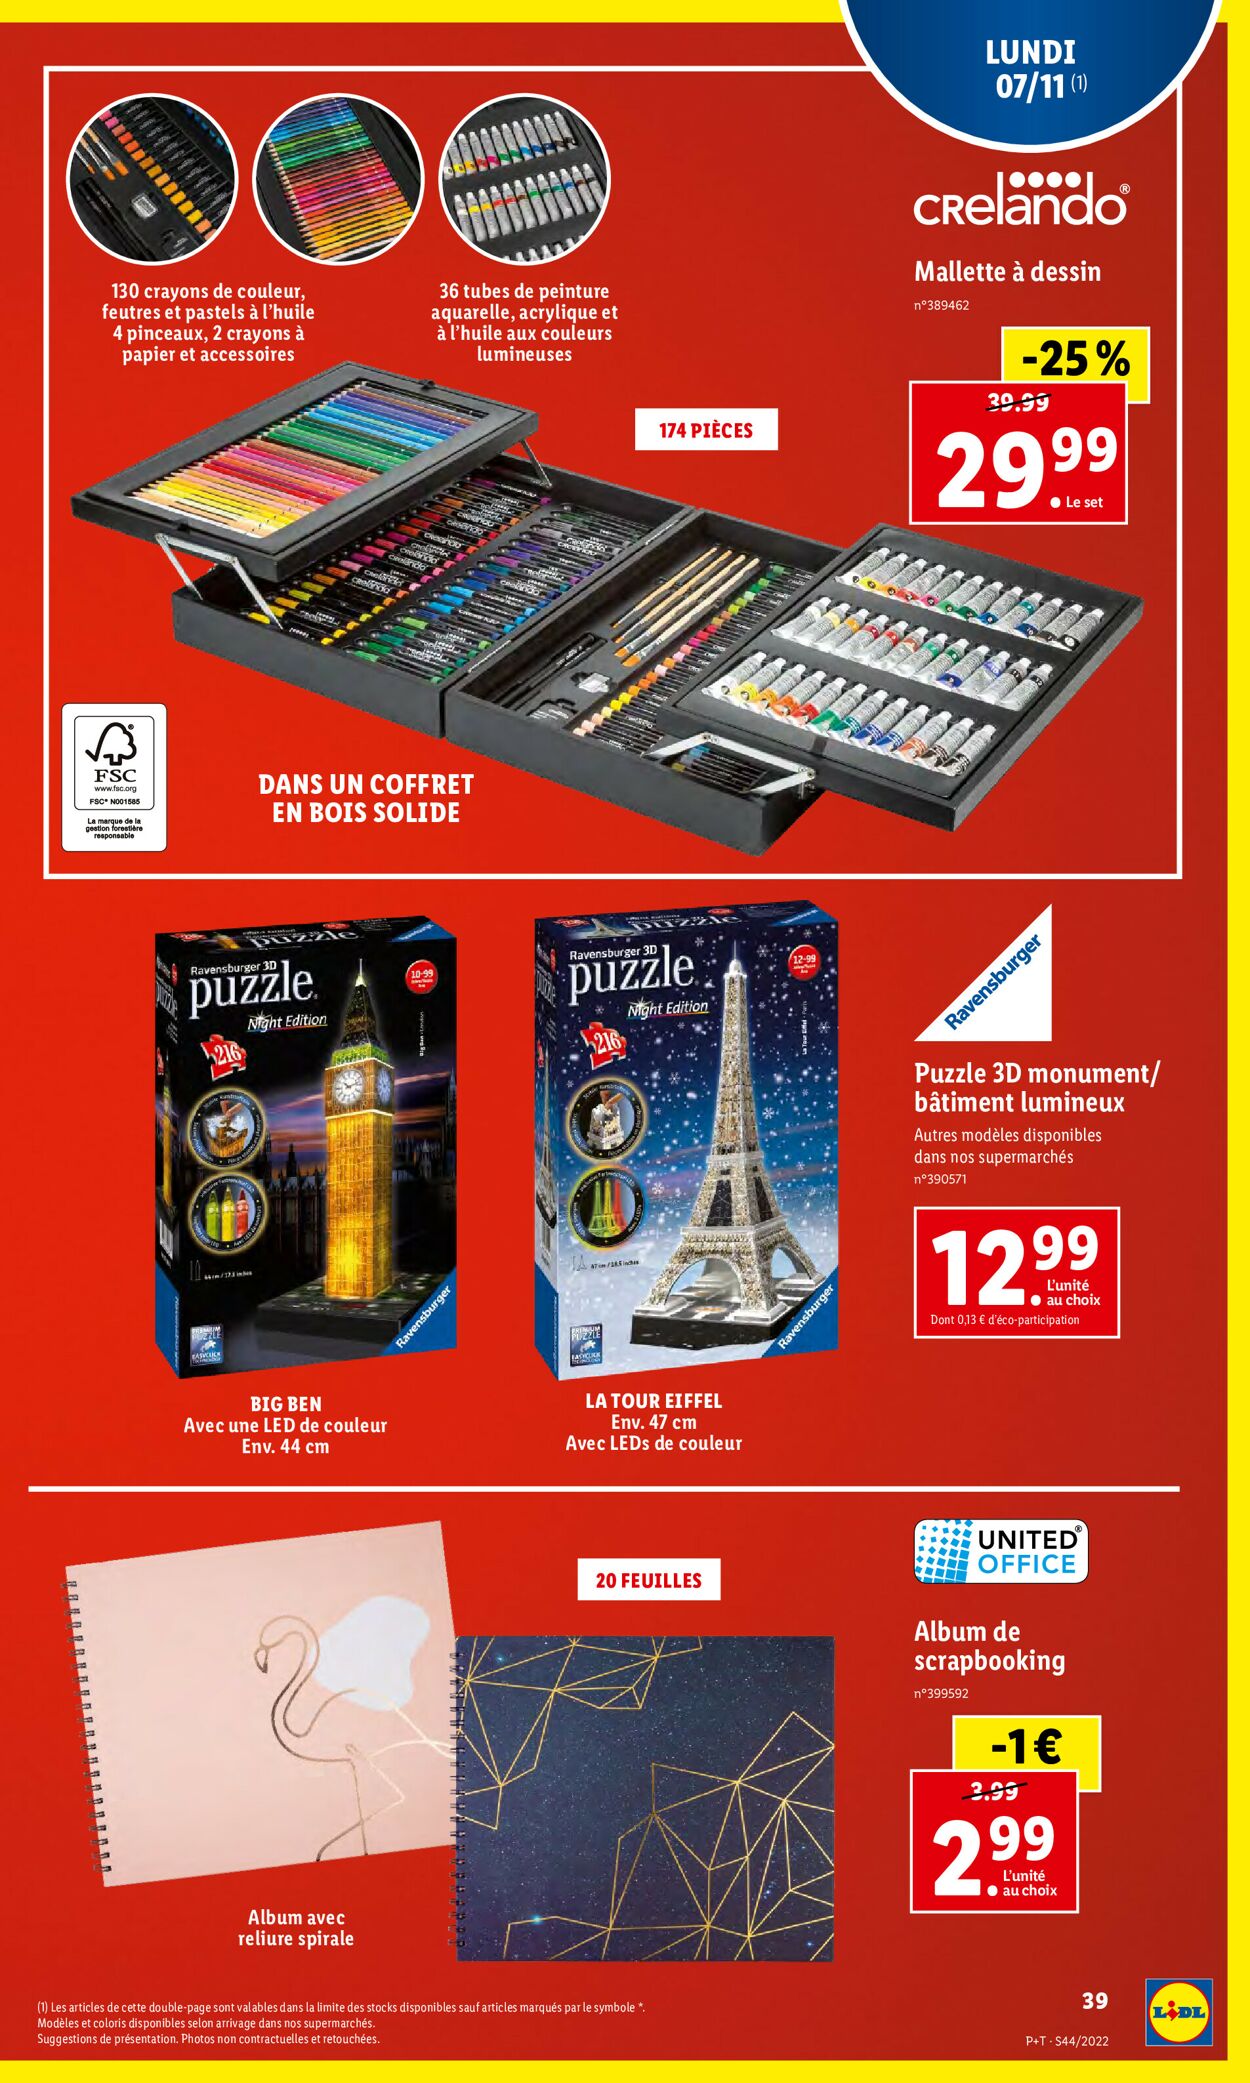 Lidl Catalogue - 02.11-08.11.2022 (Page 41)